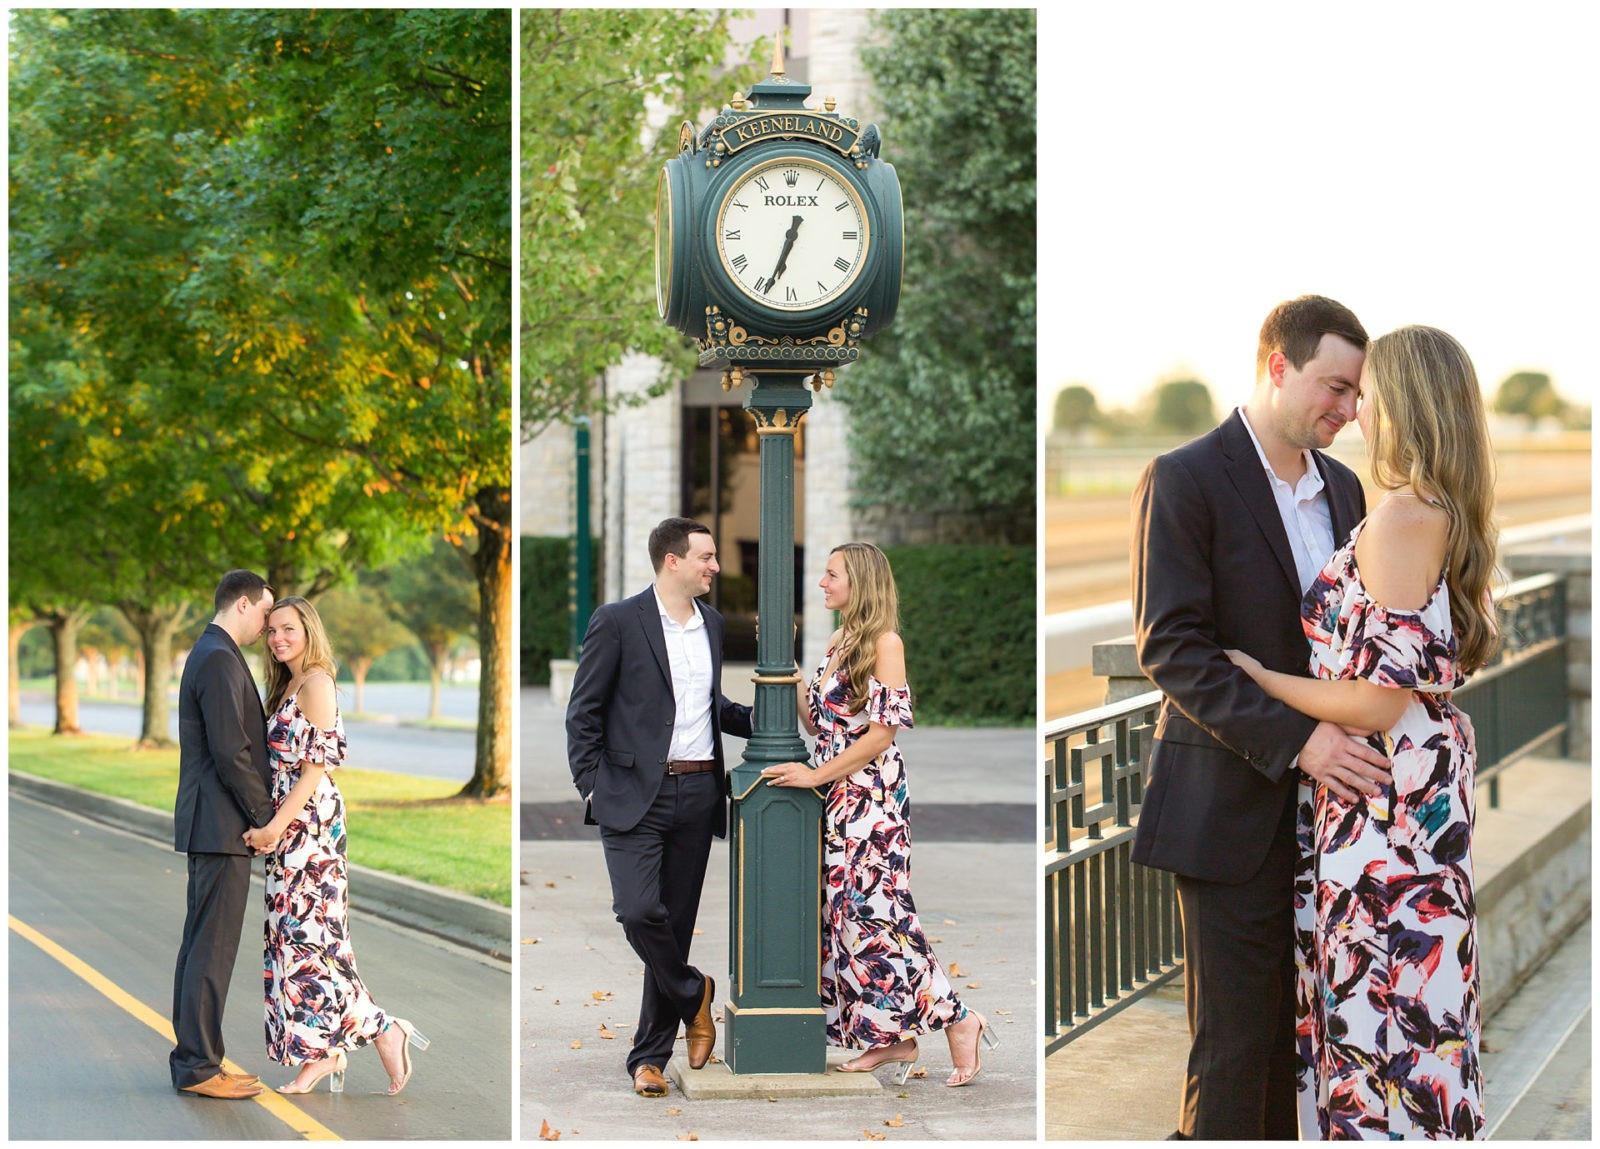 Engagement session at Keeneland Racecourse in Lexington, Kentucky.